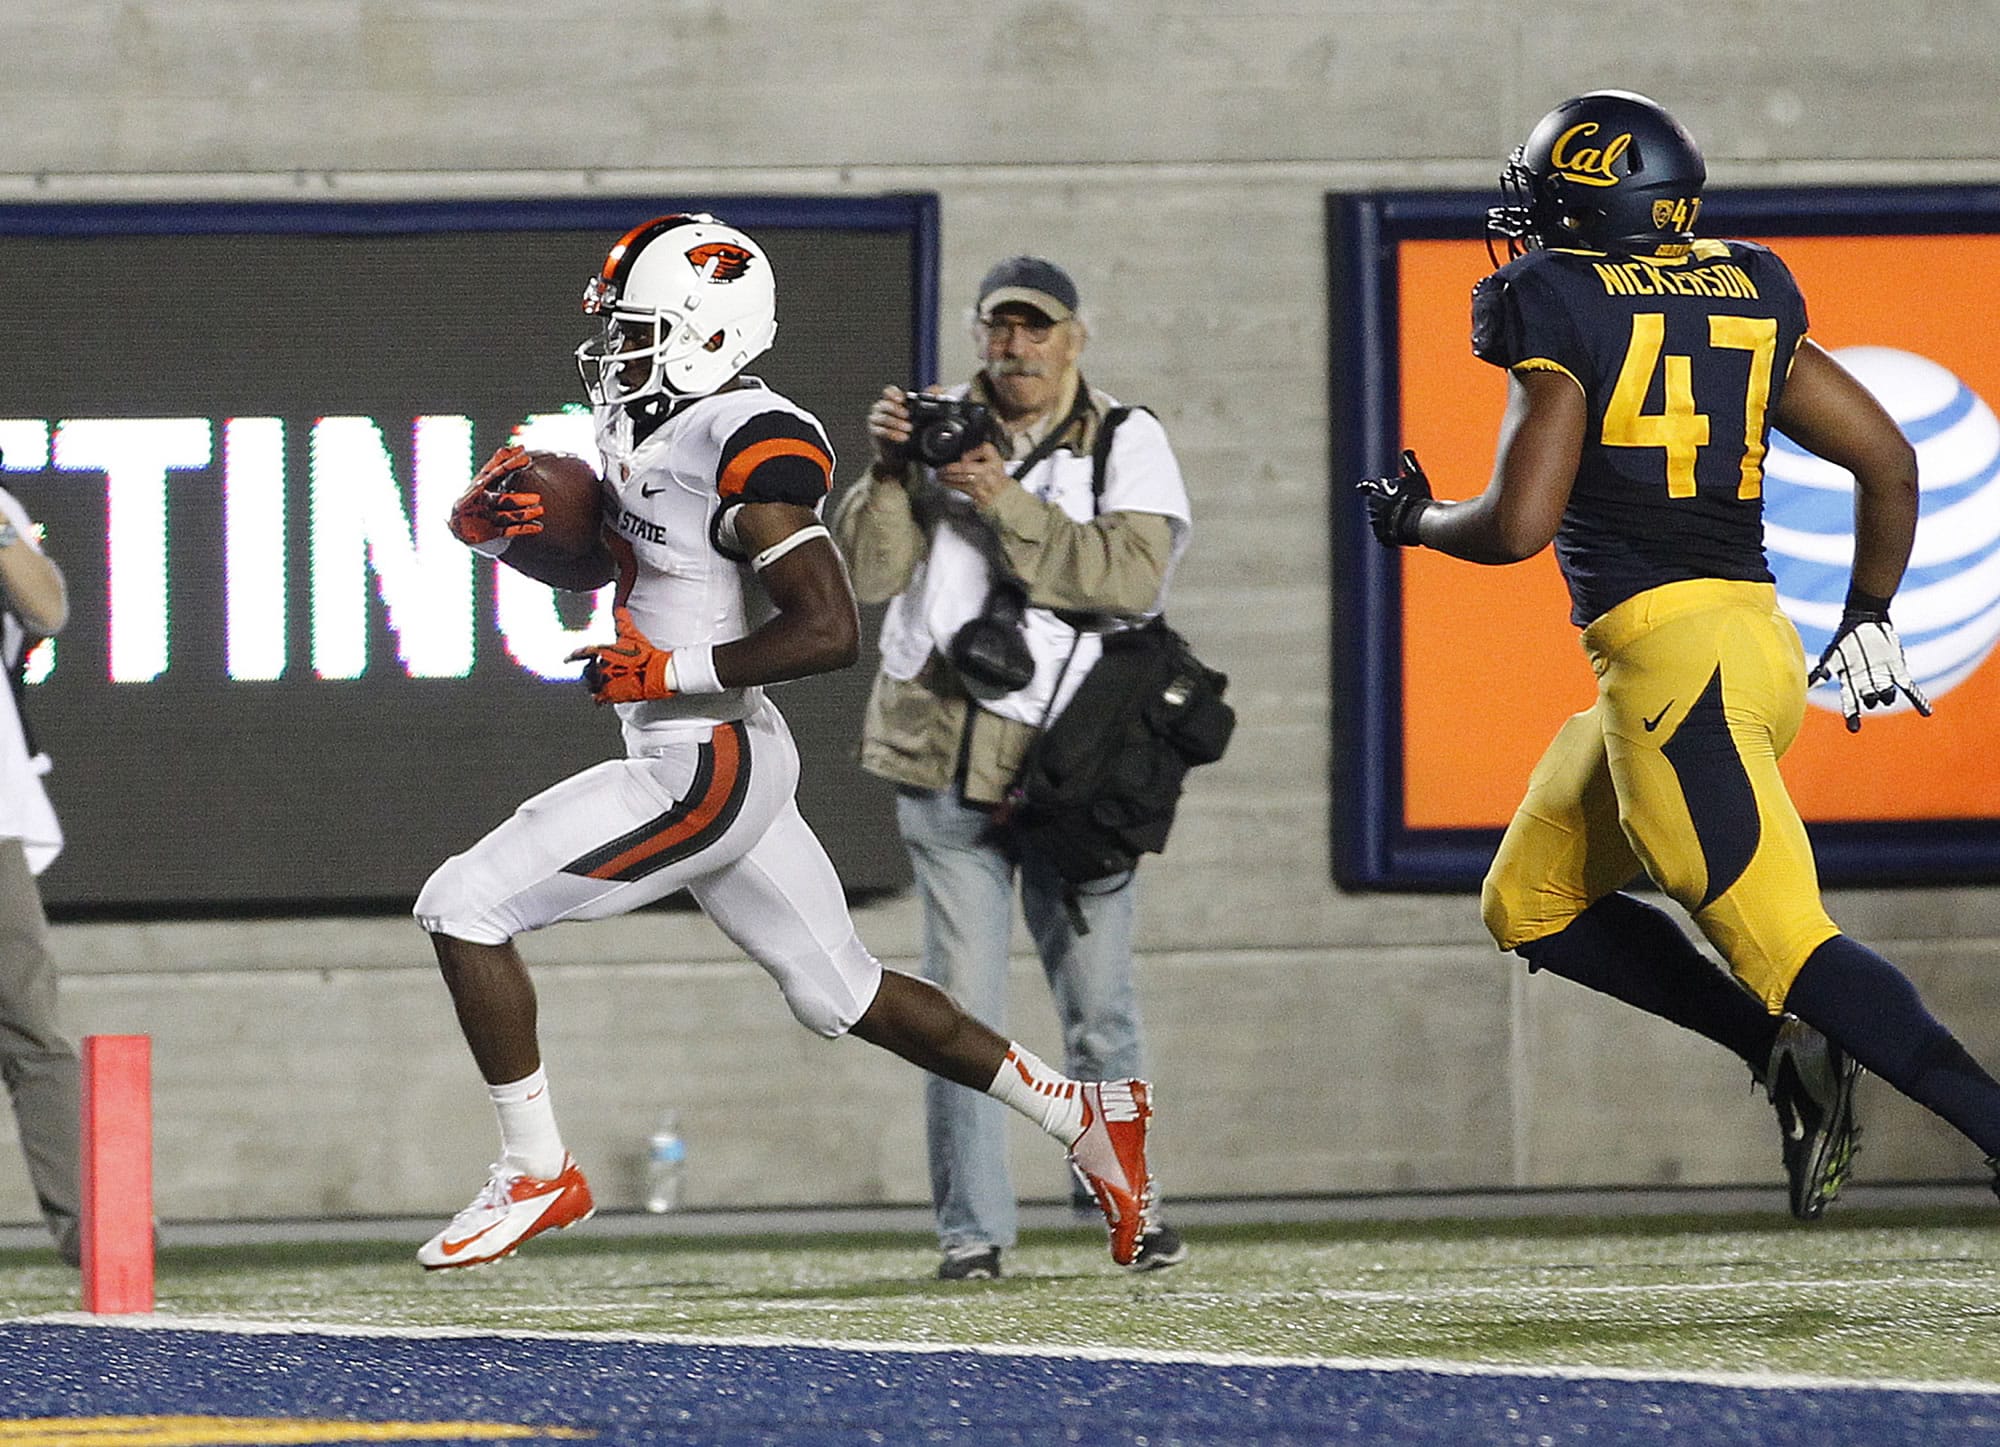 Oregon State wide receiver Brandin Cooks (7) runs for a touchdown past California linebacker Hardy Nickerson (47) during the second quarter of an NCAA college football game in Berkeley, Calif., Saturday, Oct. 19, 2013.